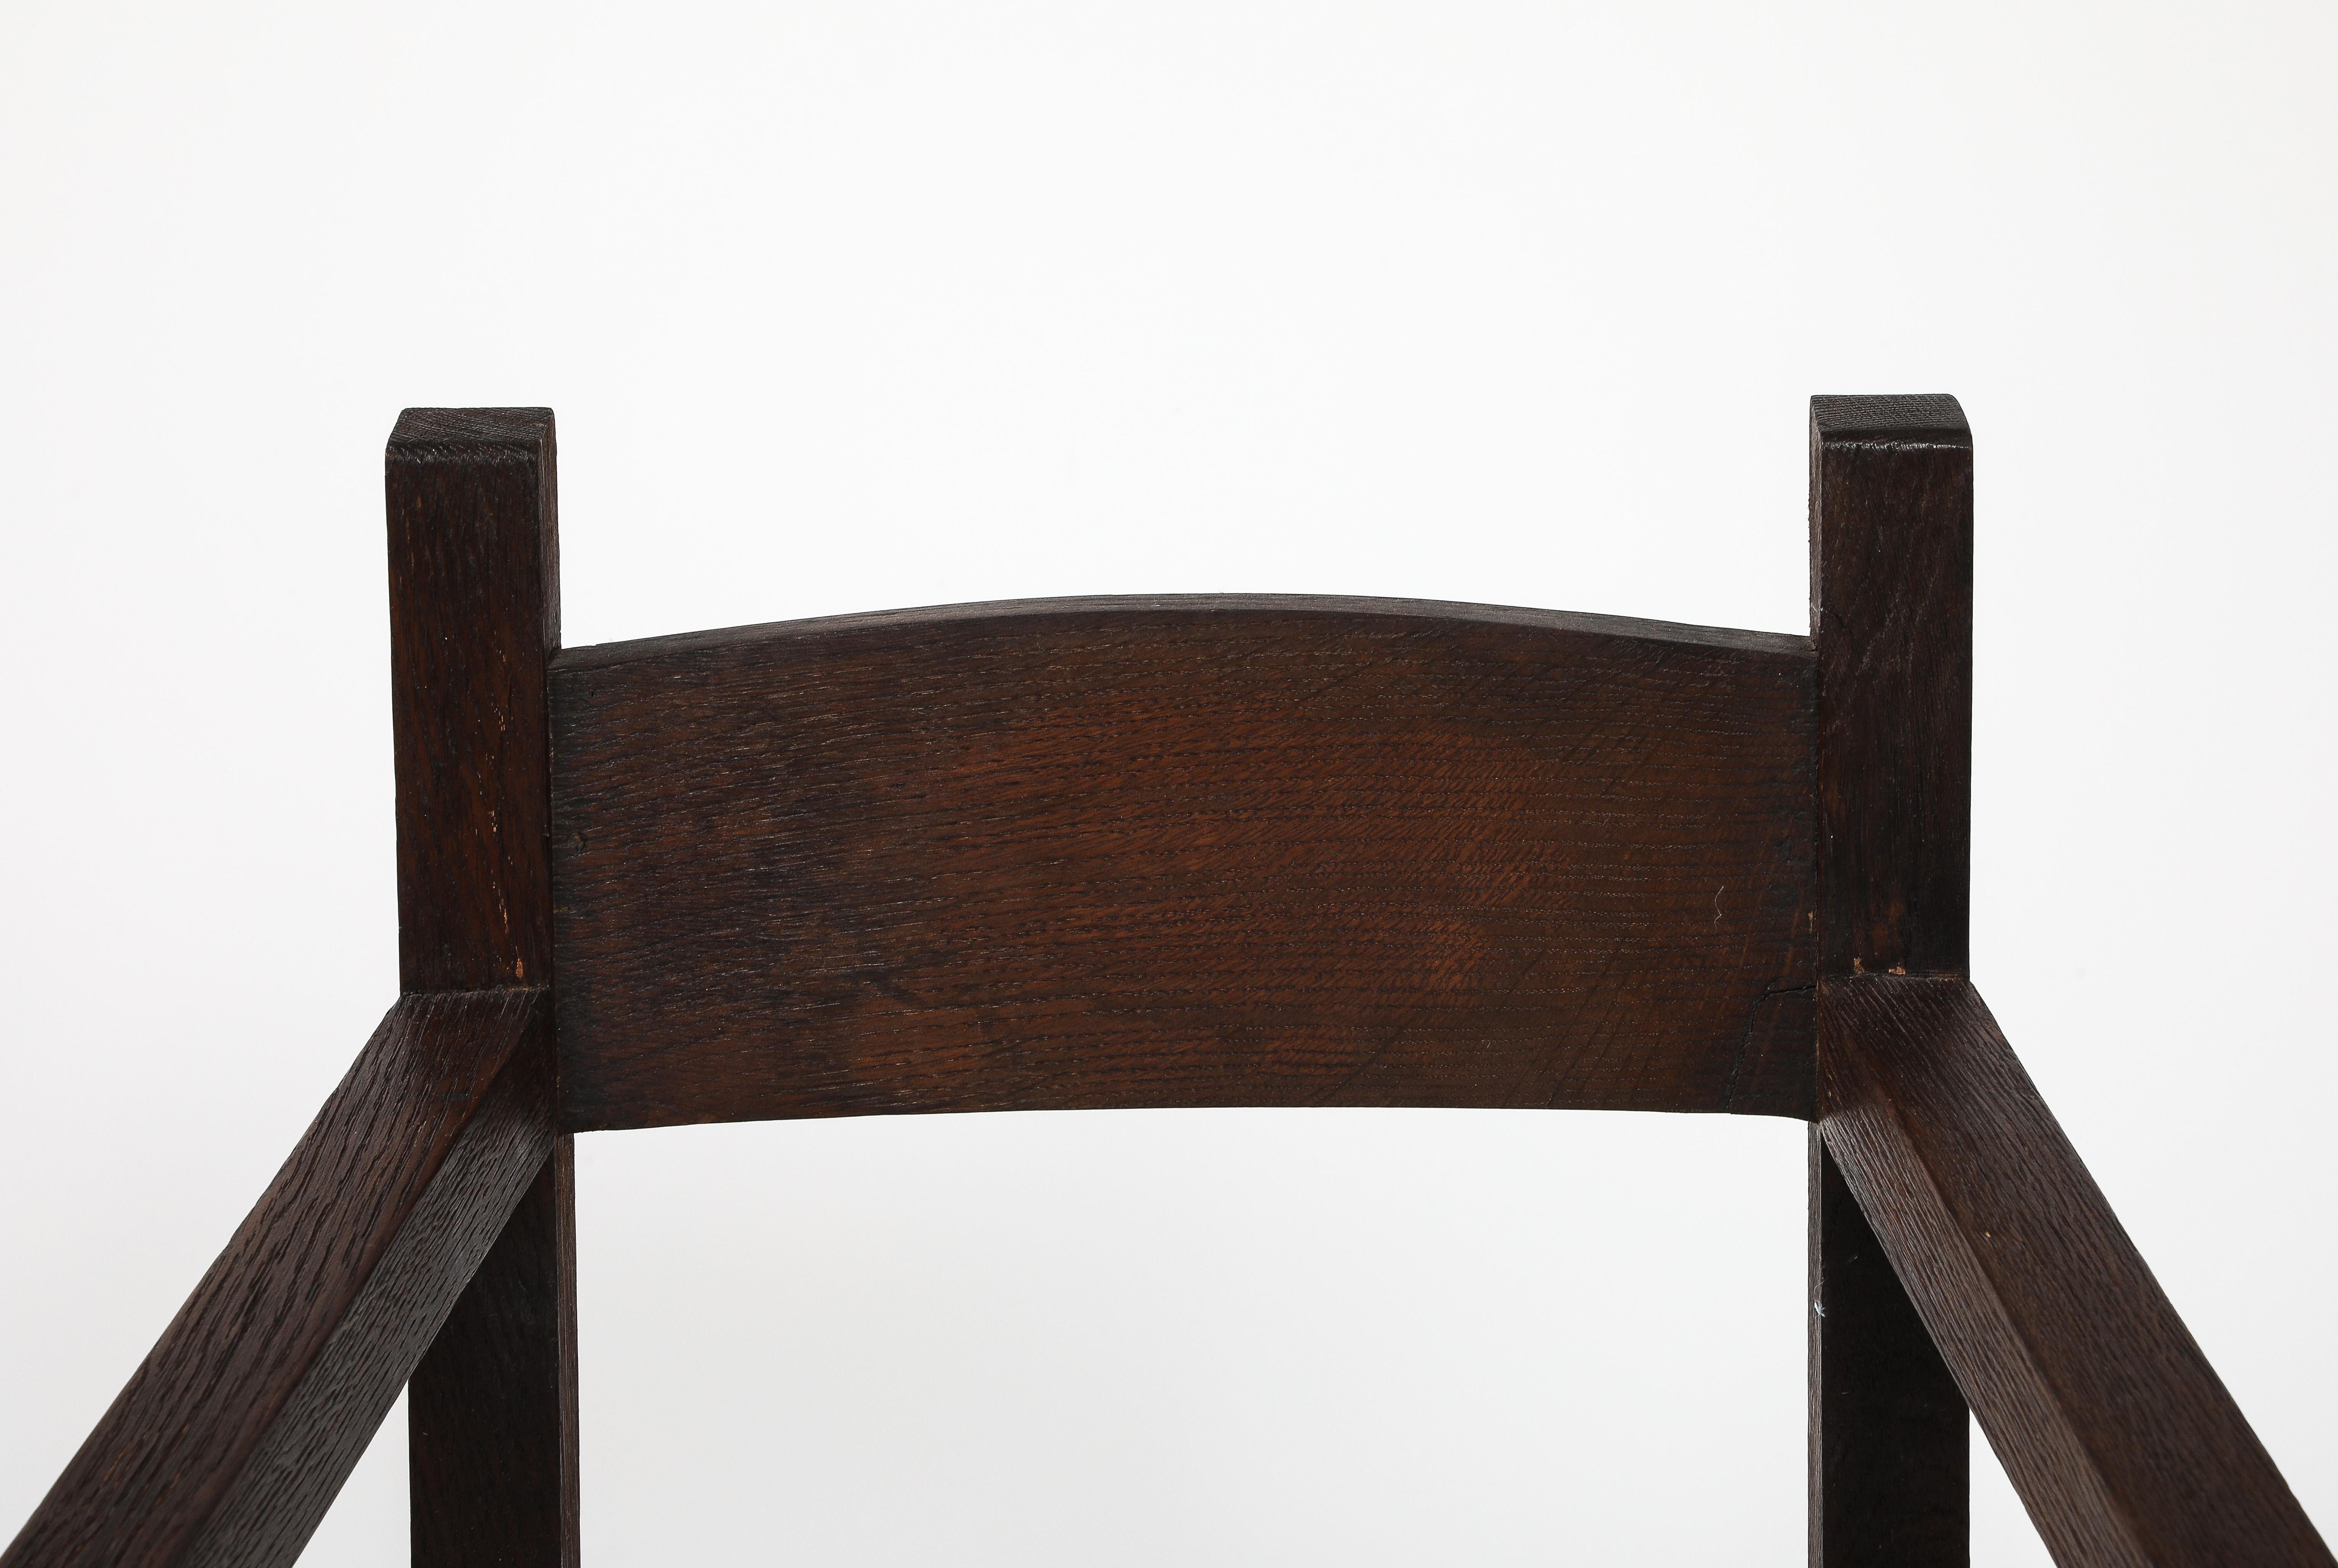 French Pair of Modernist Eyre de Lanux Armchairs in Brushed Oak, France, c. 1925 For Sale